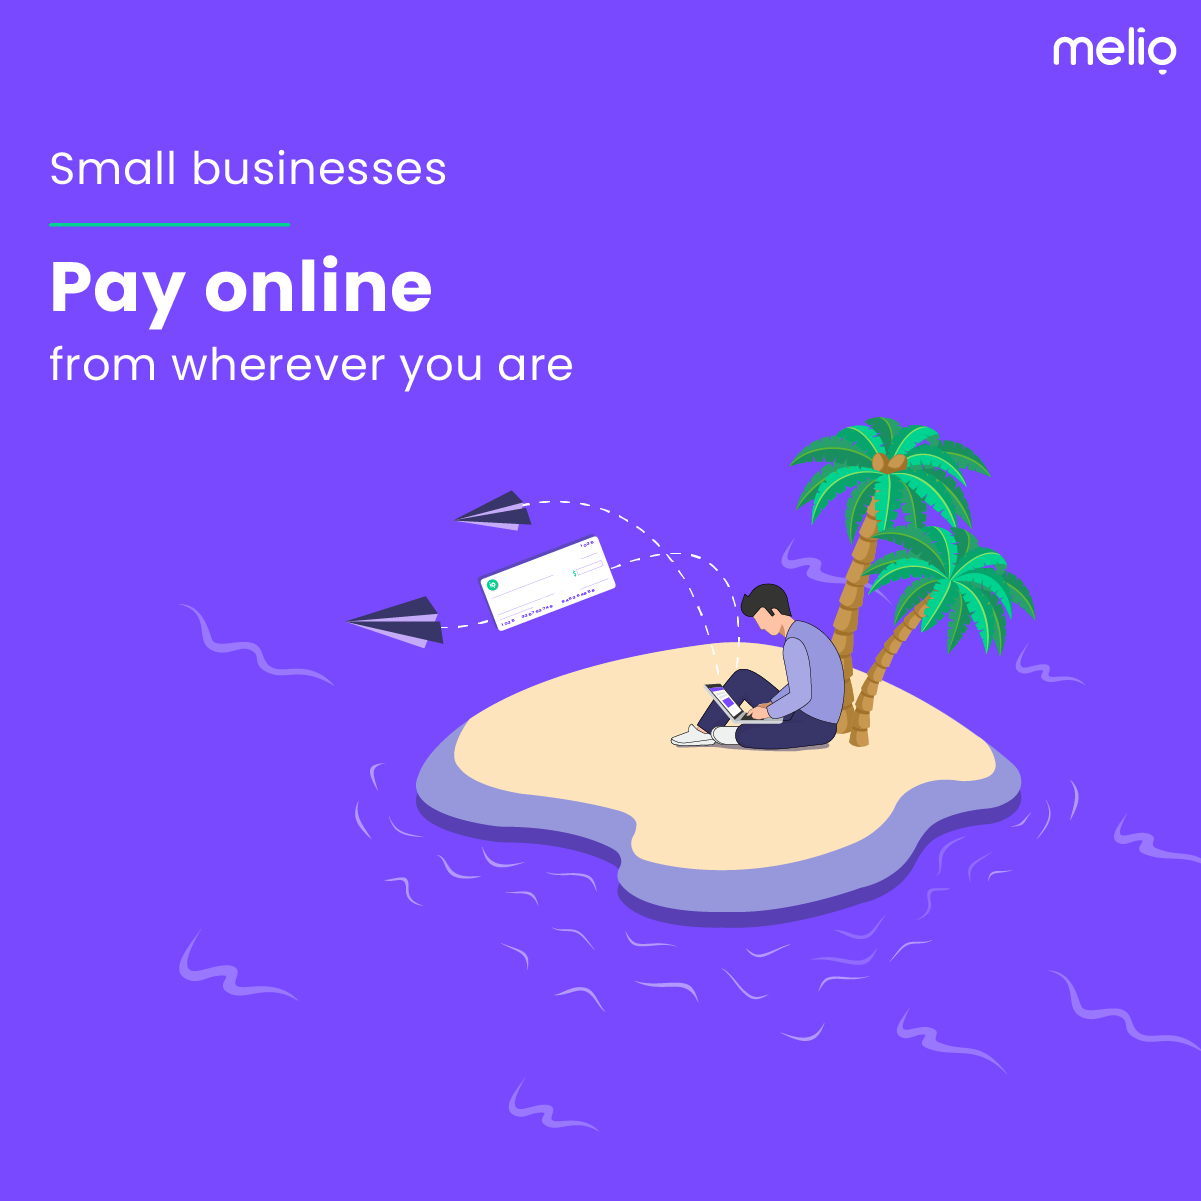 Use Melio to pay all your business bills online